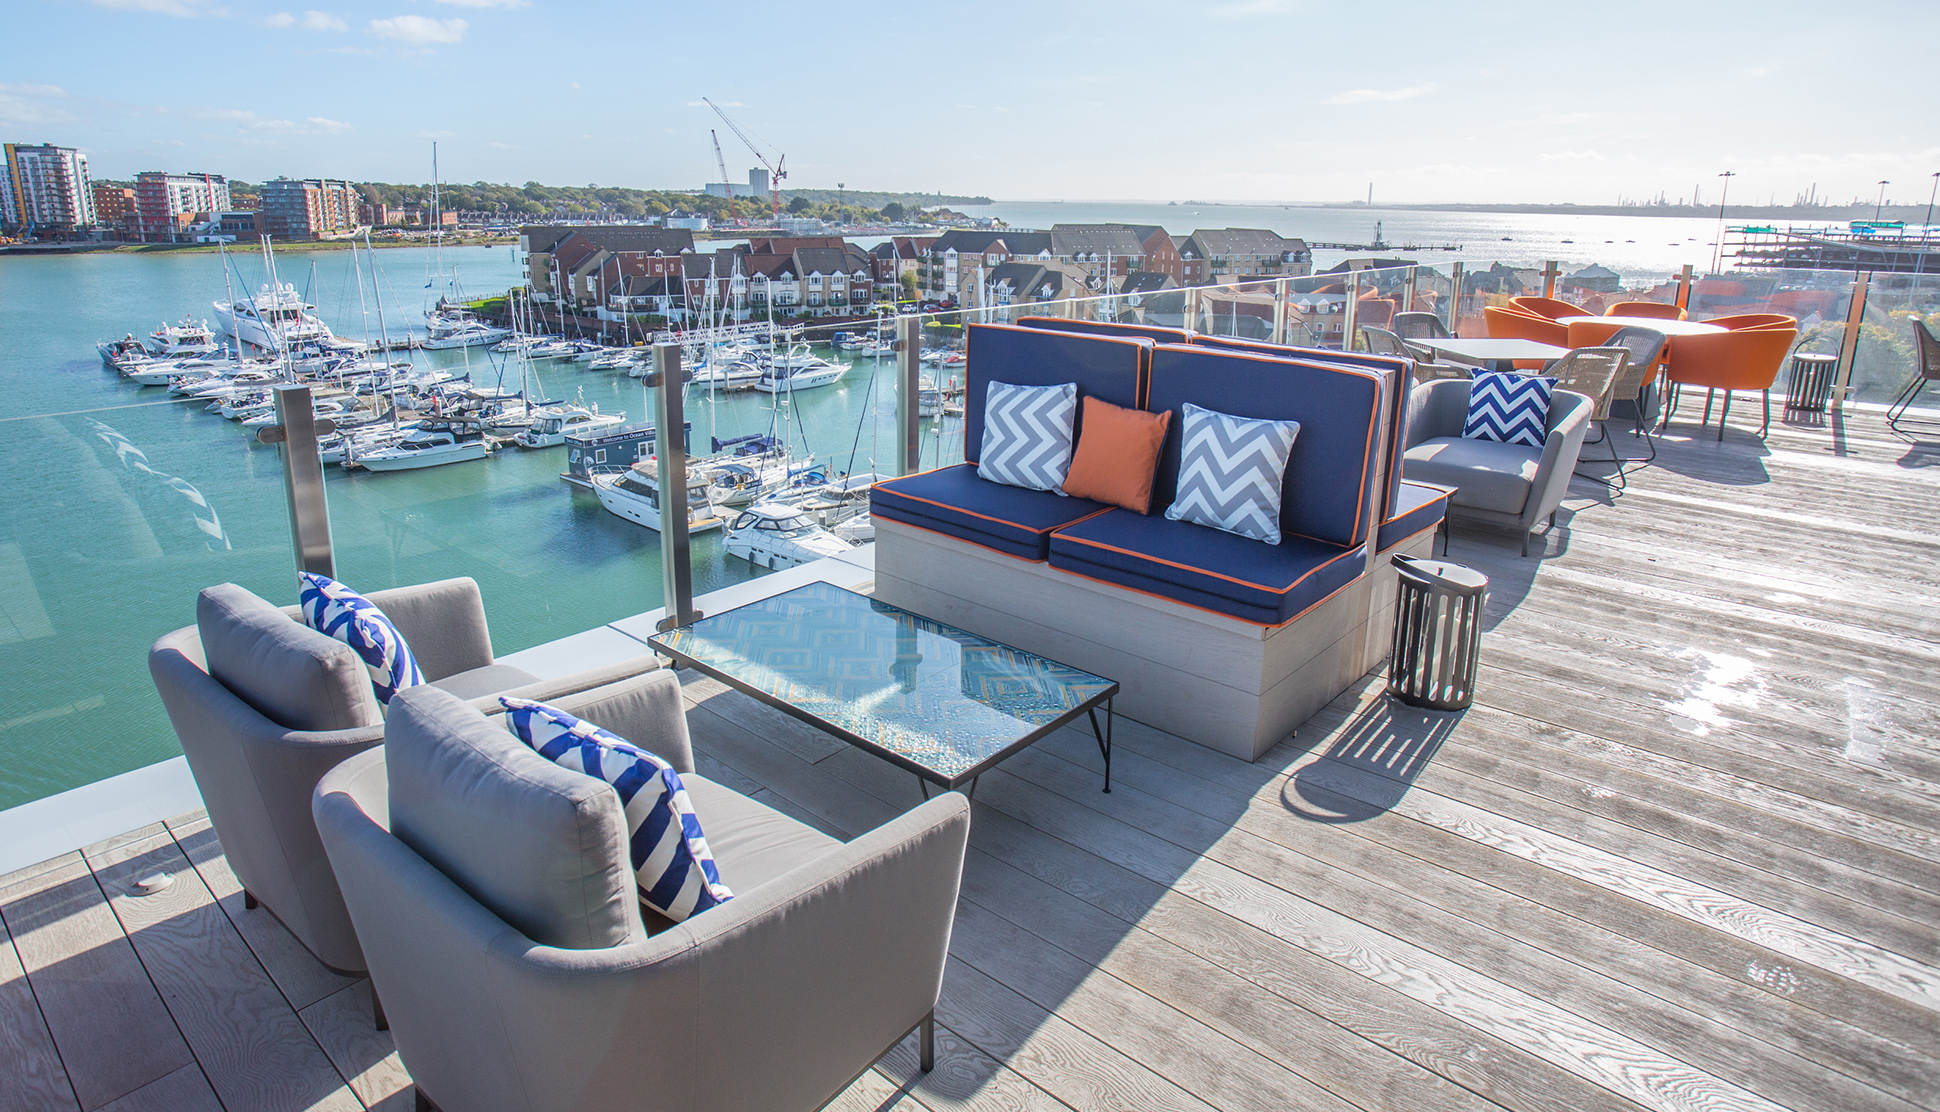 Outdoor Eating in Hampshire - Southampton Harbour Hotel